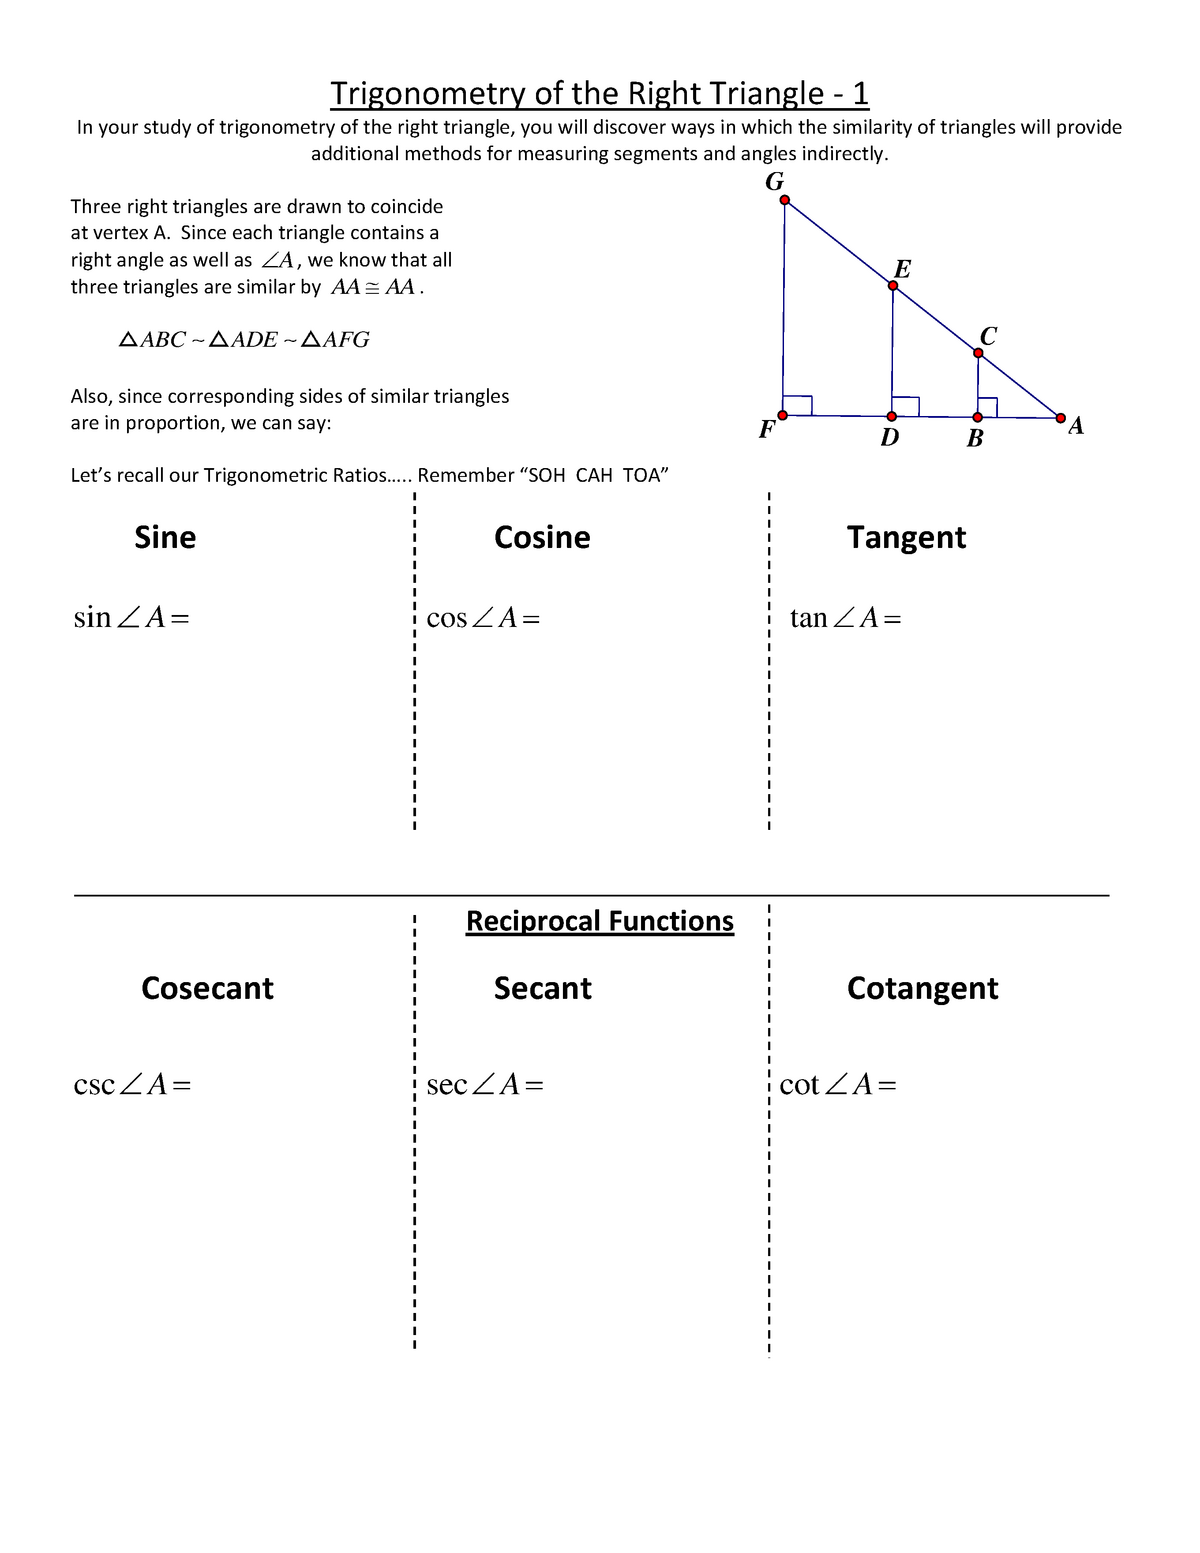 Geom trig packet of worksheets Trigonometry of the Right Triangle Regarding Right Triangle Trigonometry Worksheet